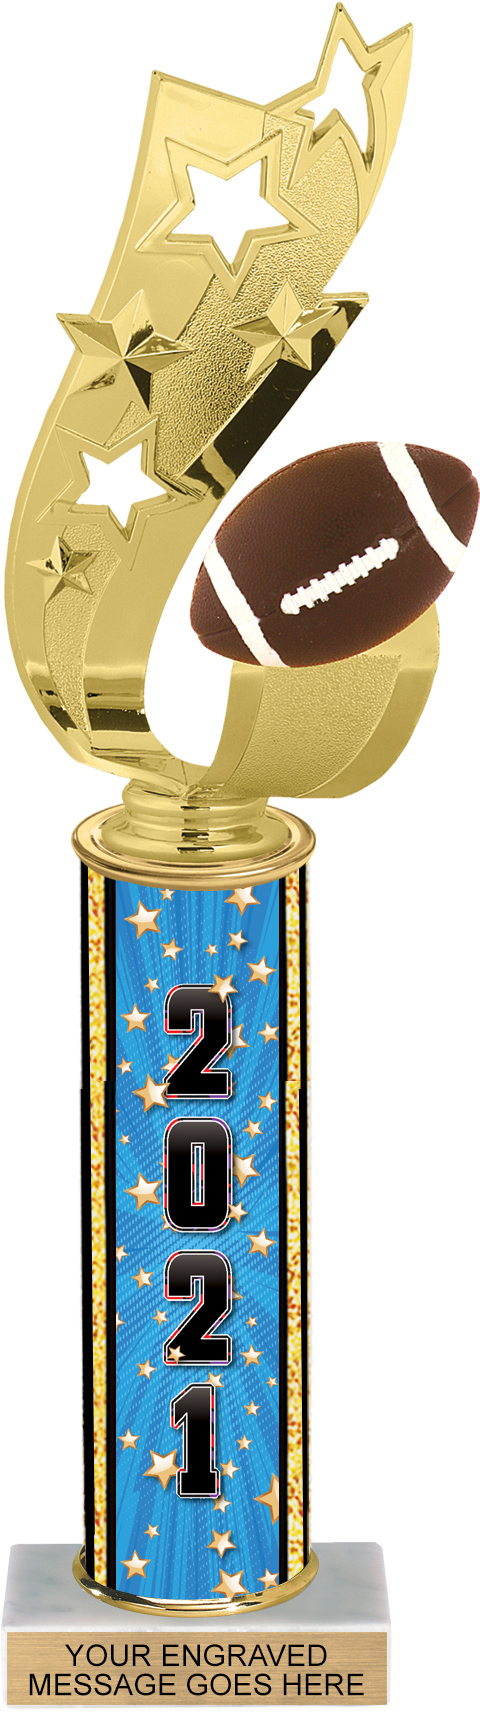 Comic Stars Column Trophy with Year - 12 inch